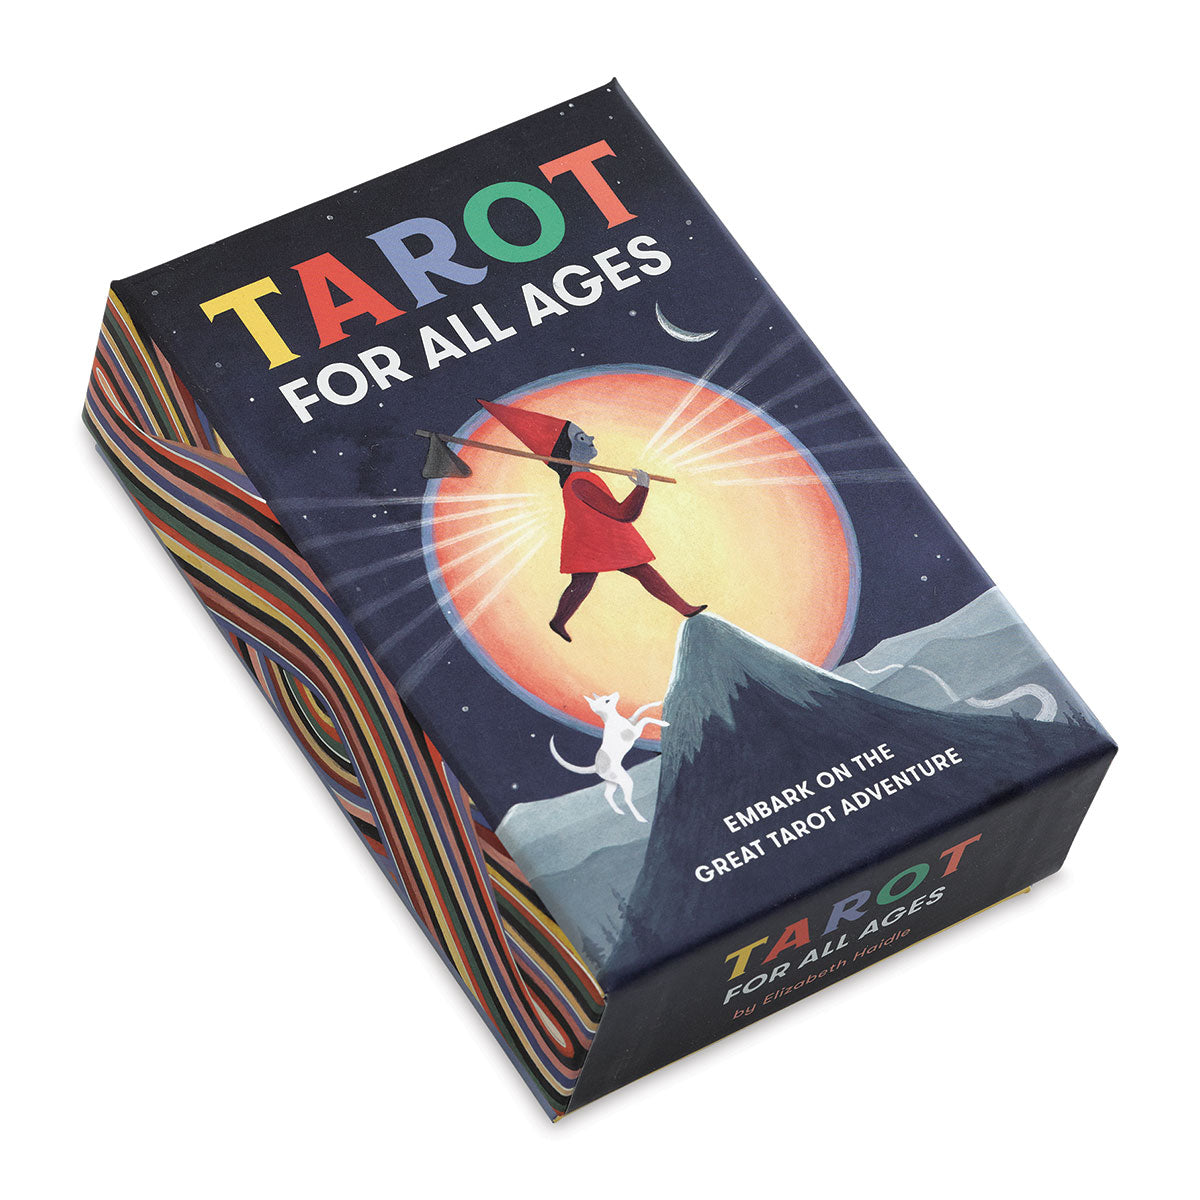 TAROT FOR ALL AGES